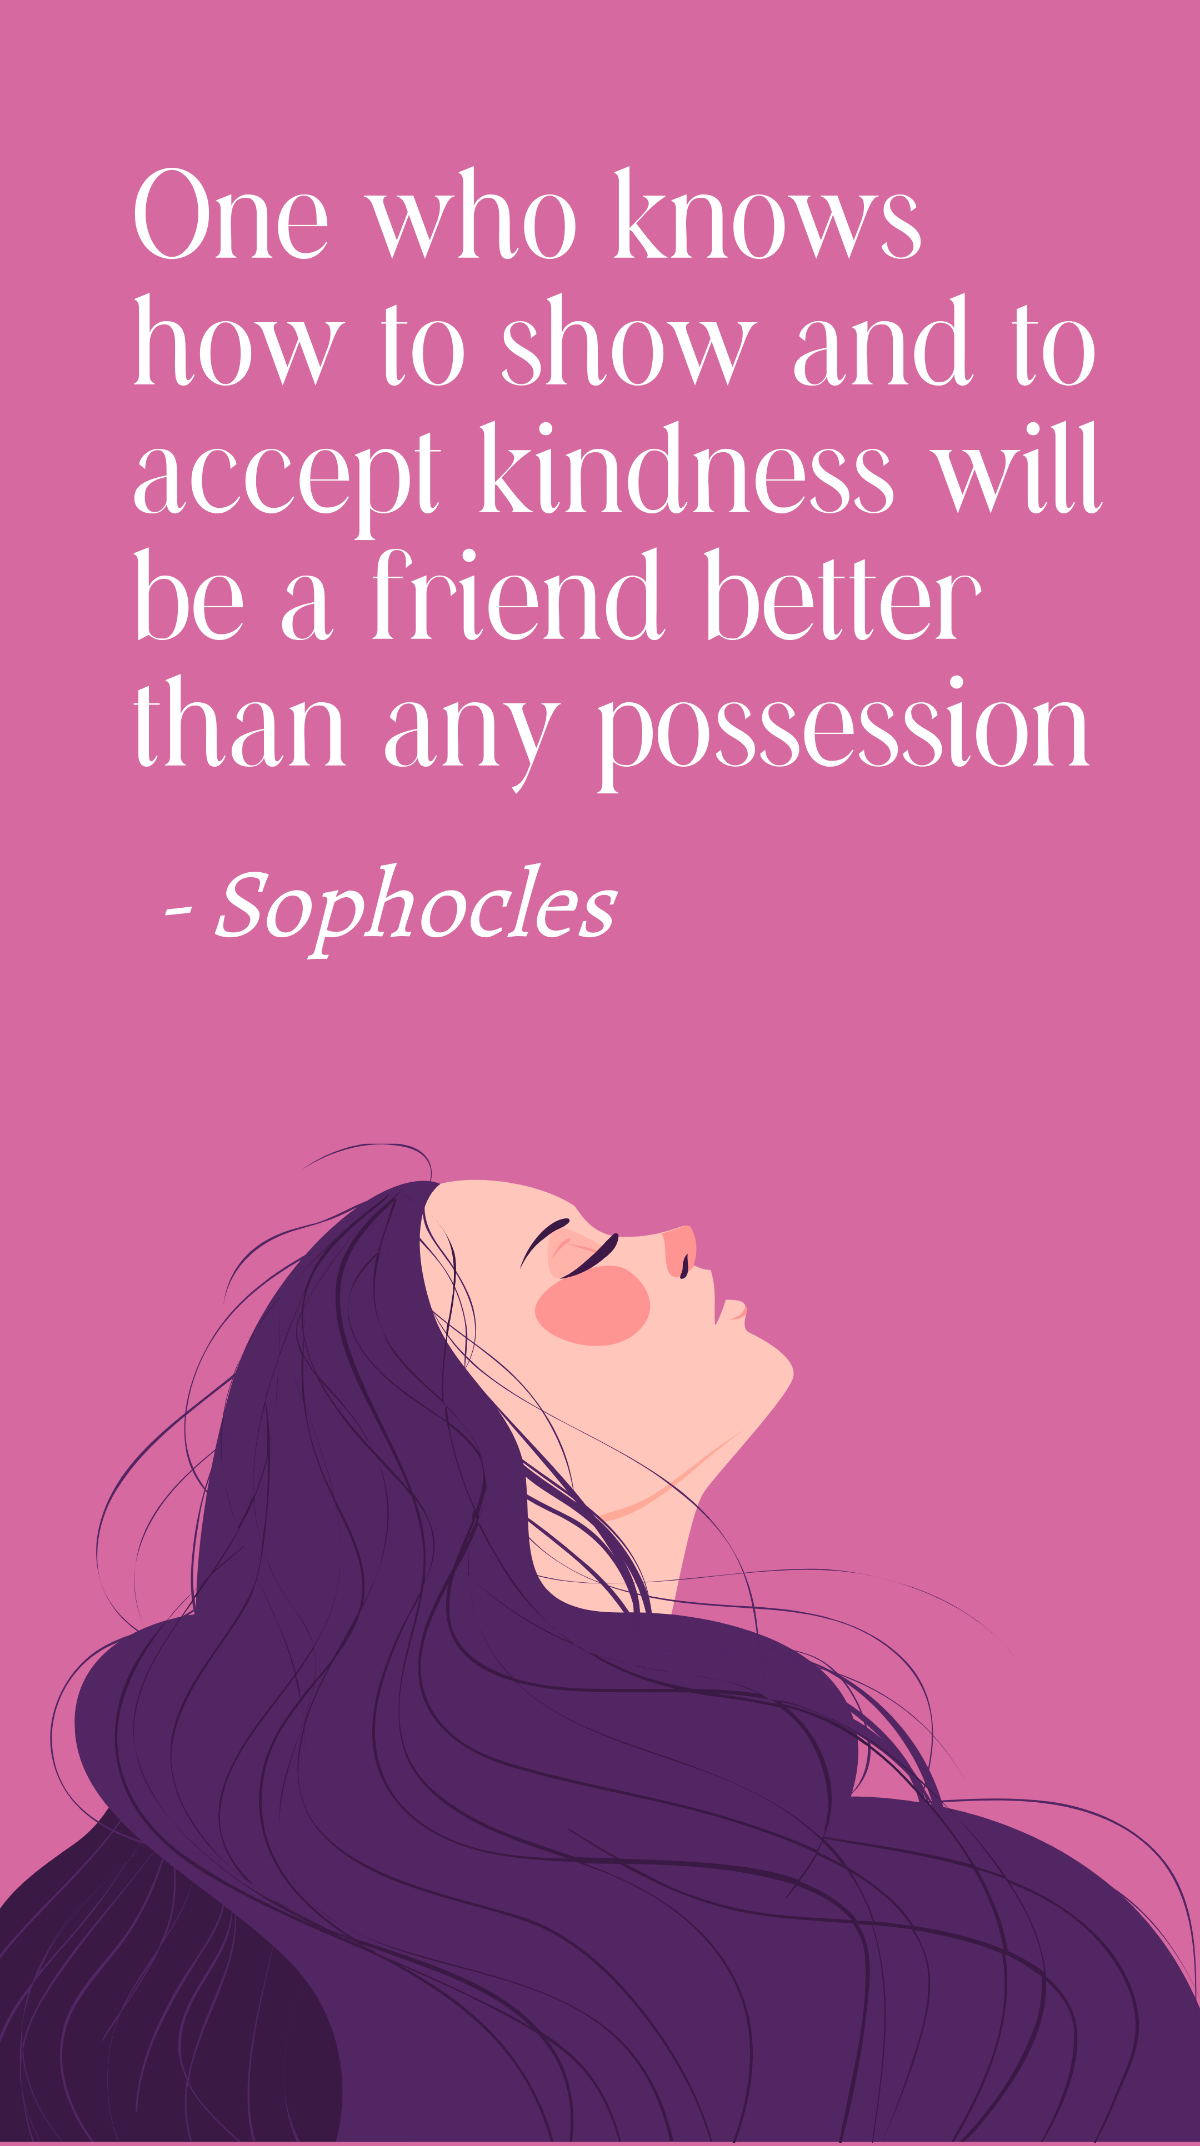 Sophocles - One who knows how to show and to accept kindness will be a friend better than any possession Template